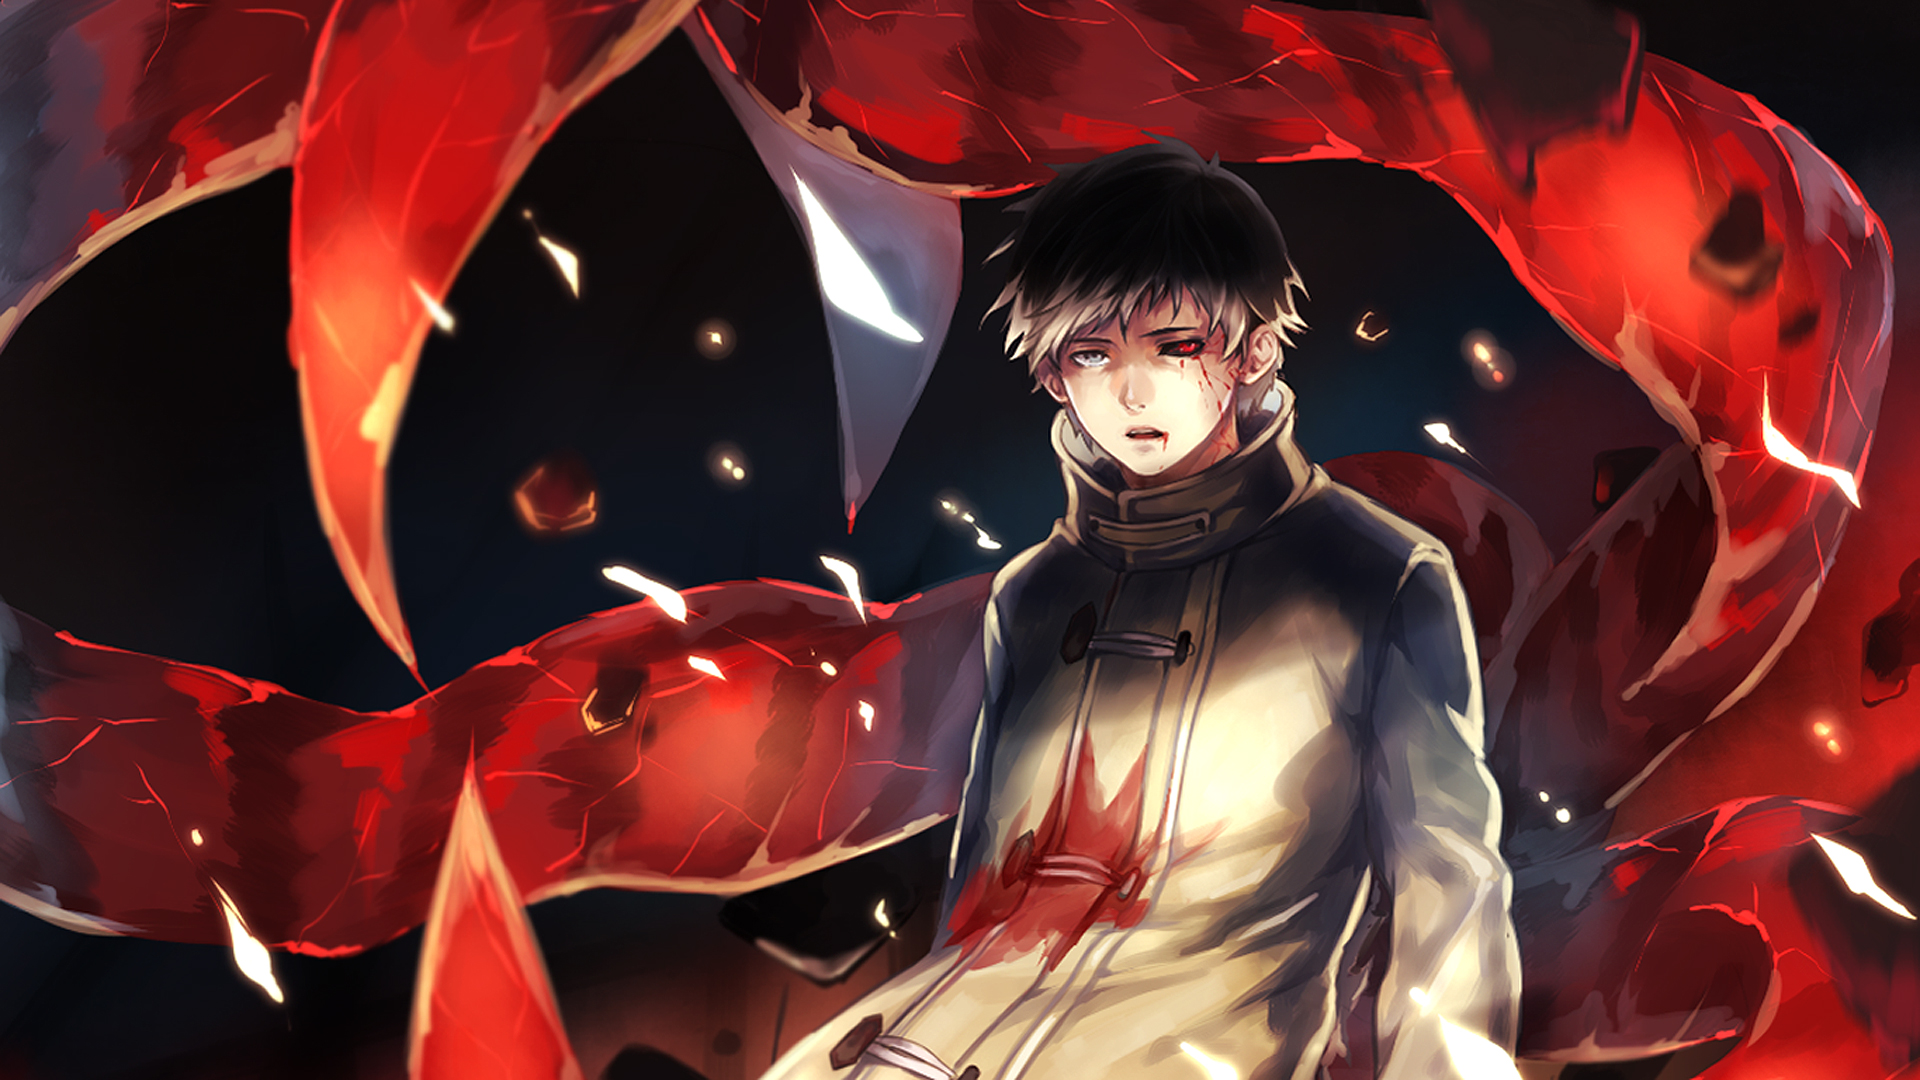 Tokyo Ghoul Full HD Wallpaper and Background Image ...